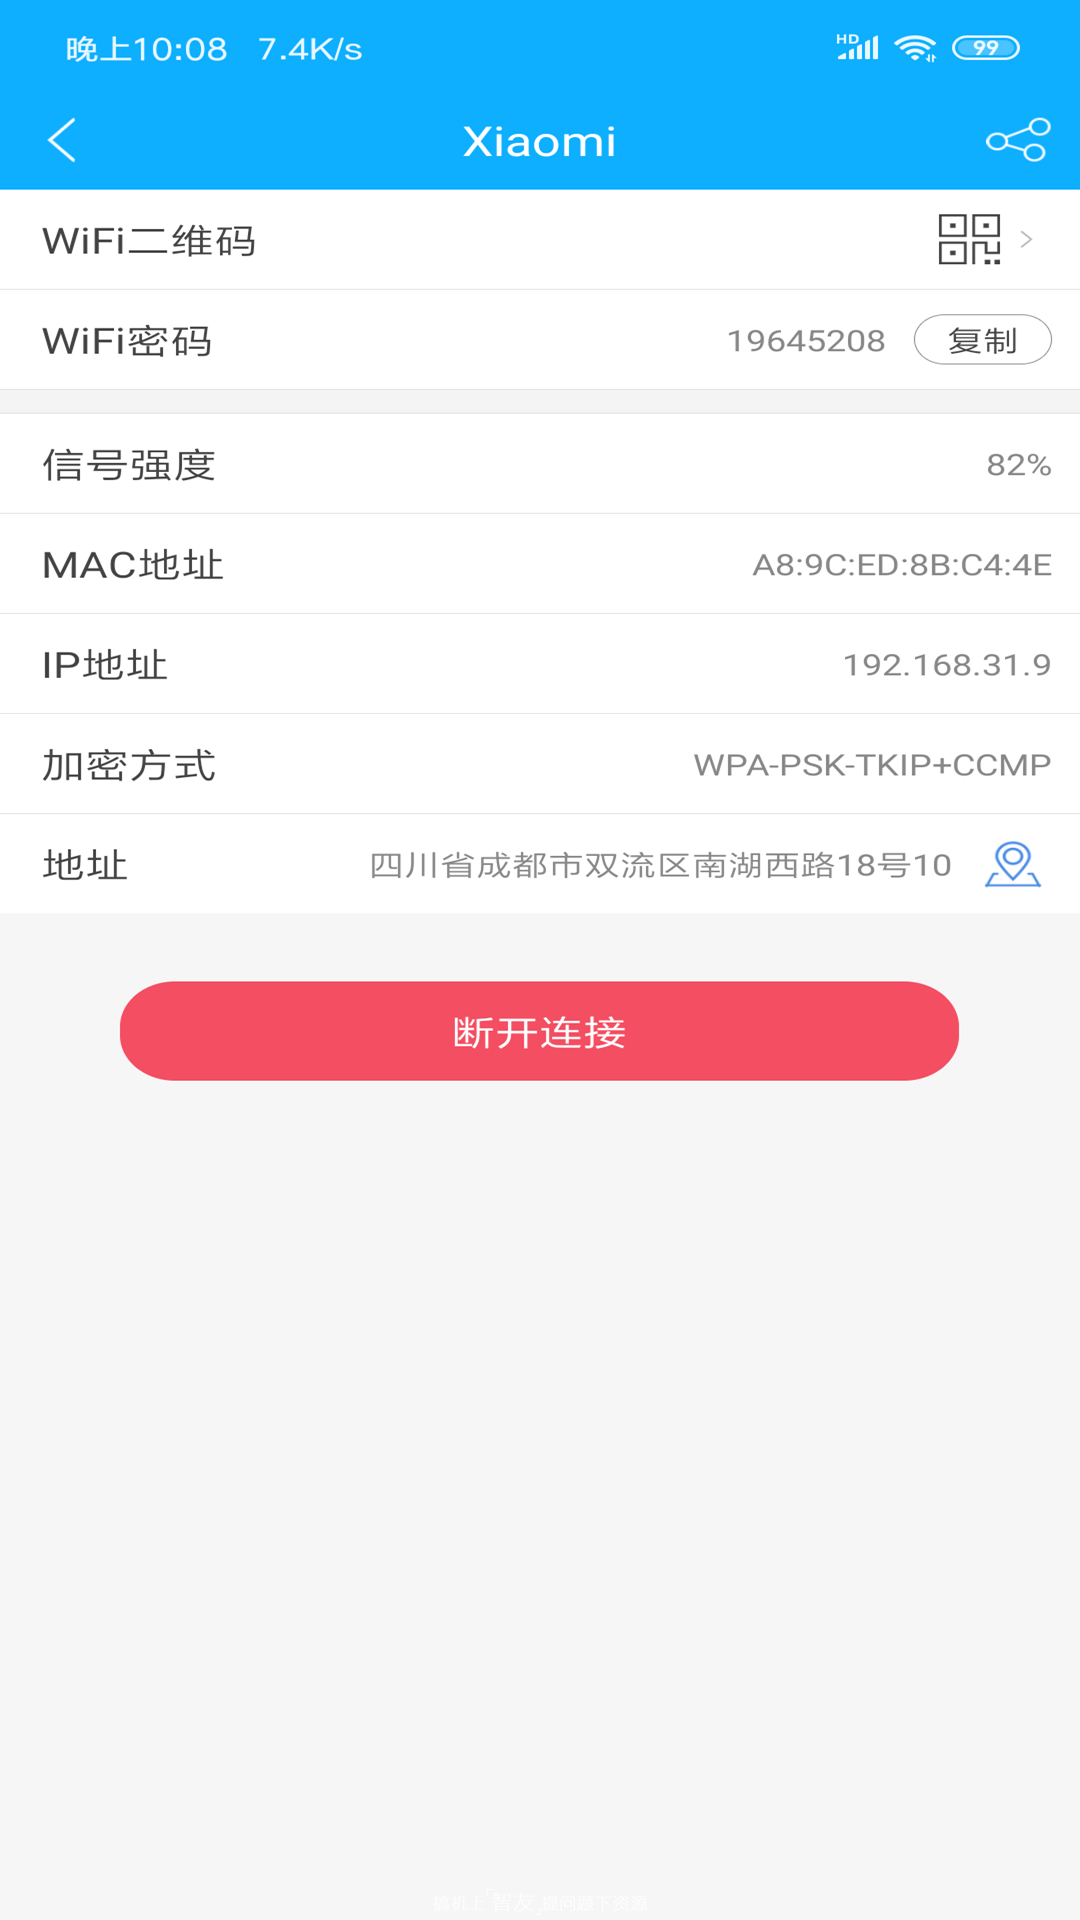 wifiԿ1.4.0.1汾Root鿴wifi롽-2.png